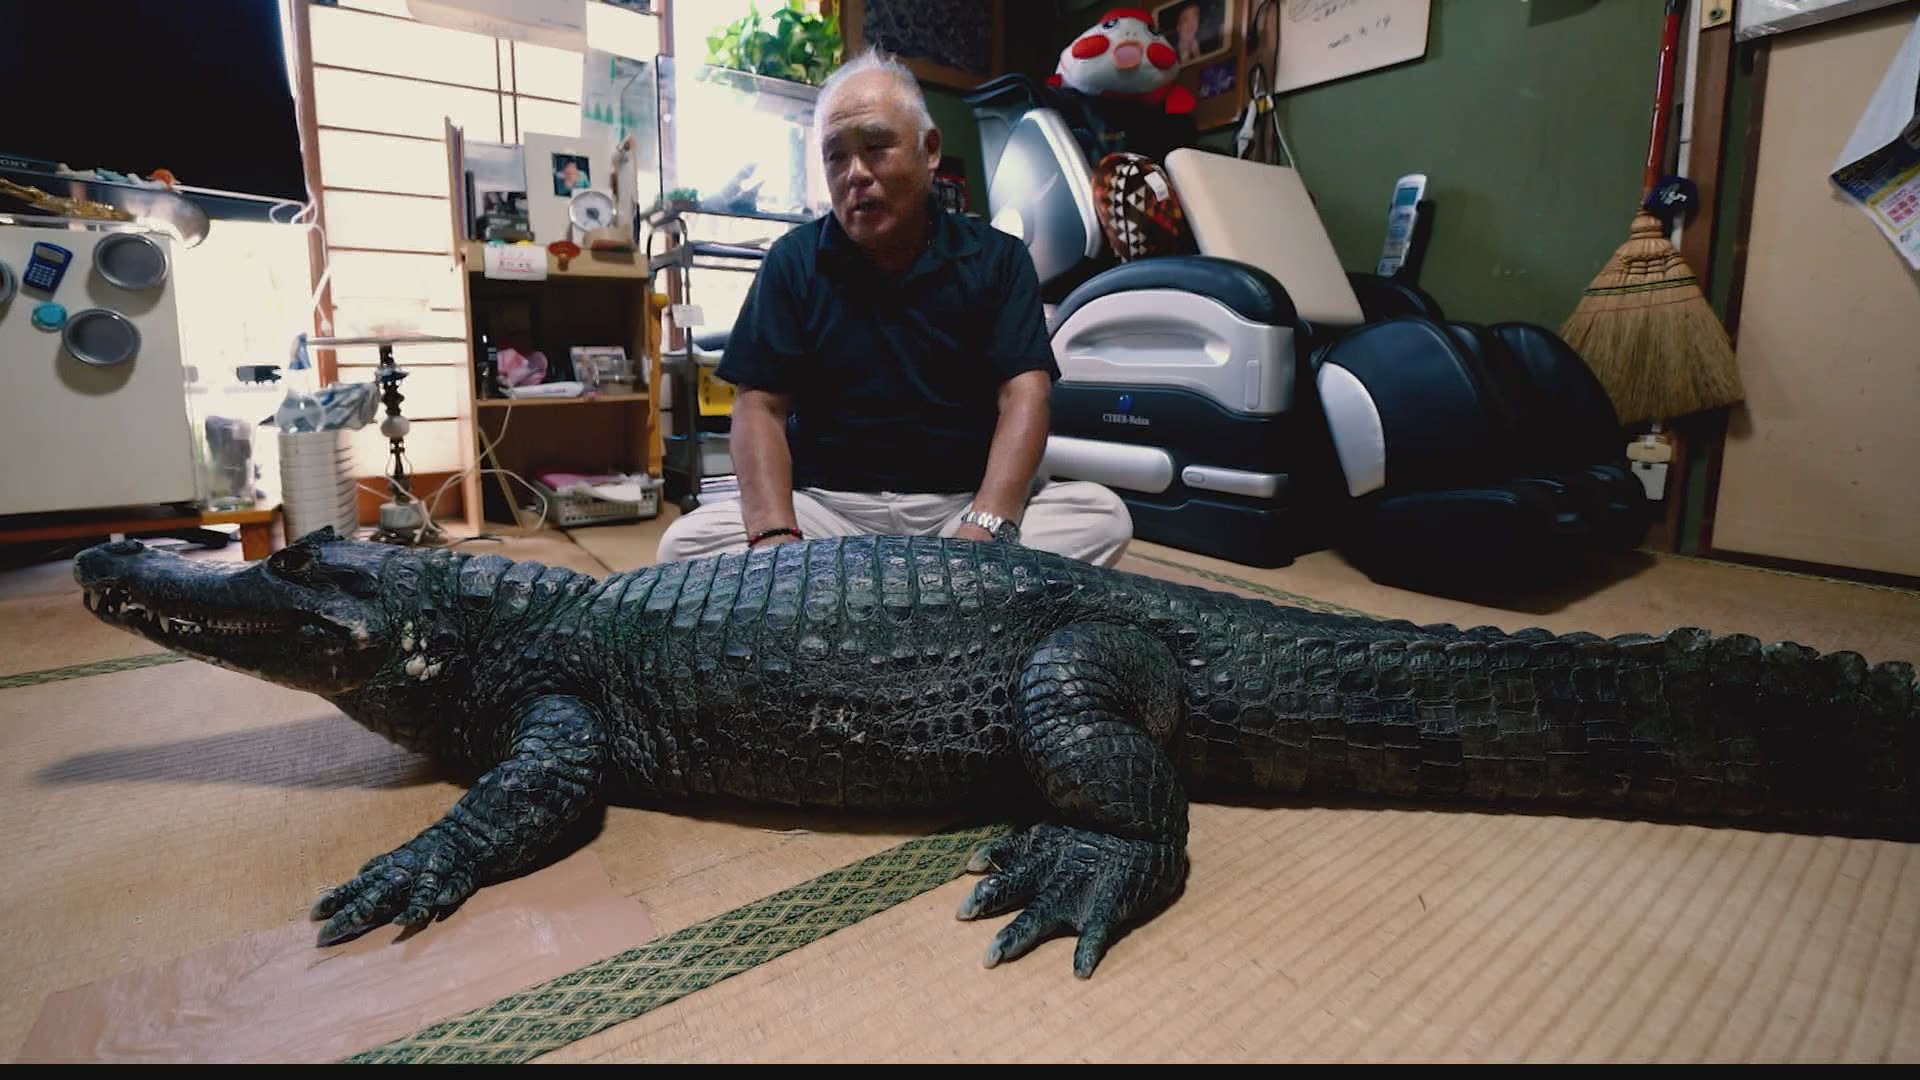 There's a word to describe Japan's "culture of cute": "kawaii." One of those cute things is Nobumitsu Murabayashi and his pet alligator.